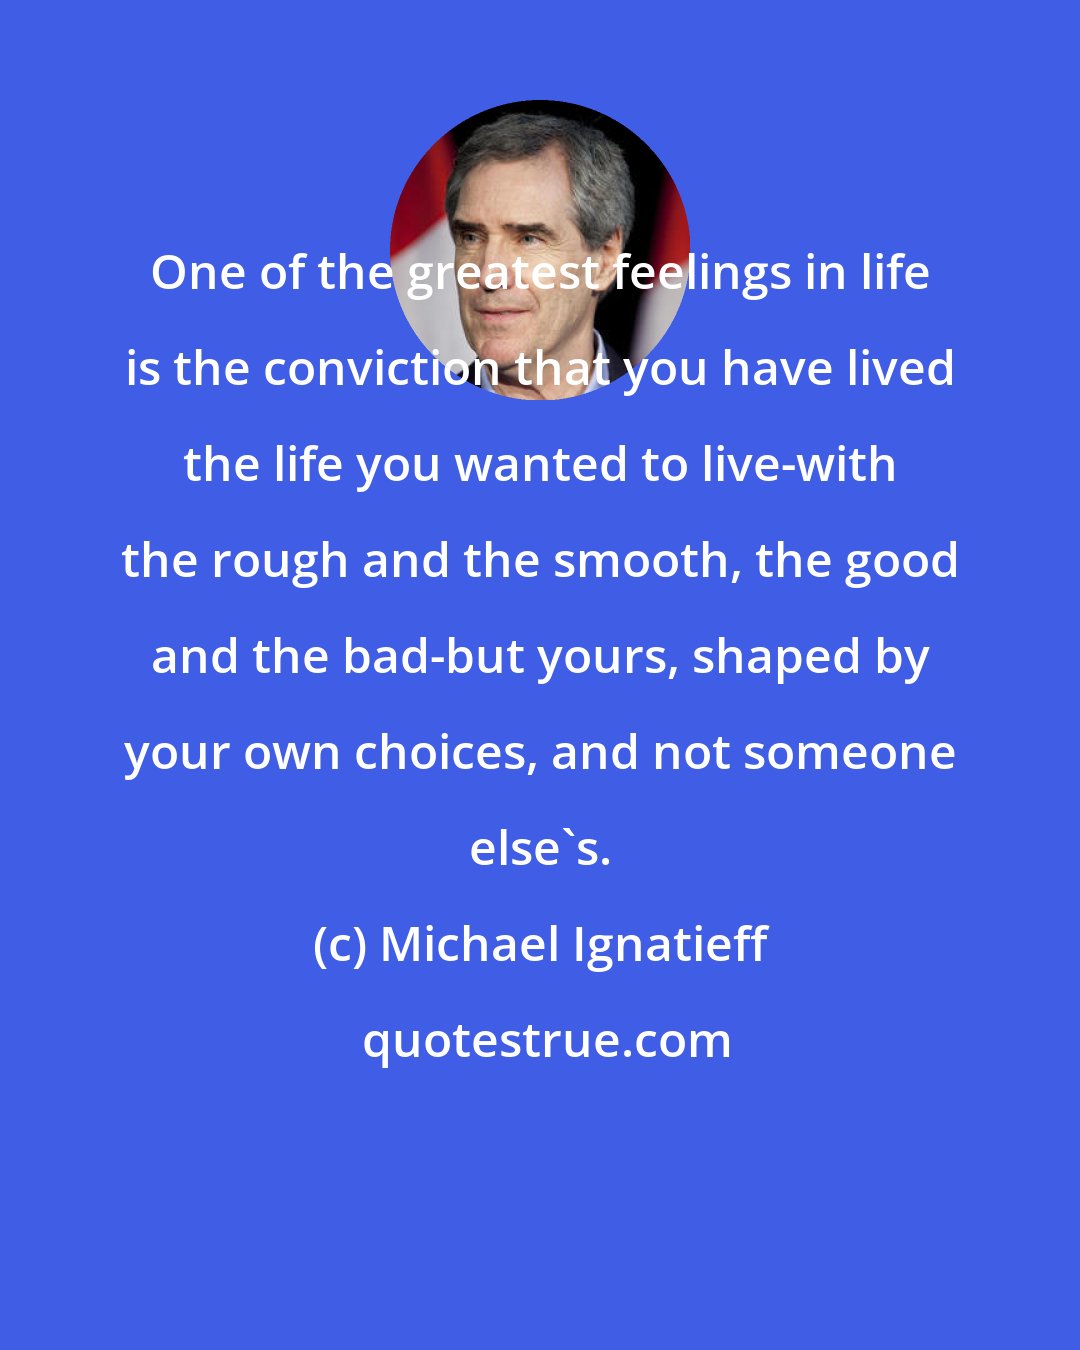 Michael Ignatieff: One of the greatest feelings in life is the conviction that you have lived the life you wanted to live-with the rough and the smooth, the good and the bad-but yours, shaped by your own choices, and not someone else's.